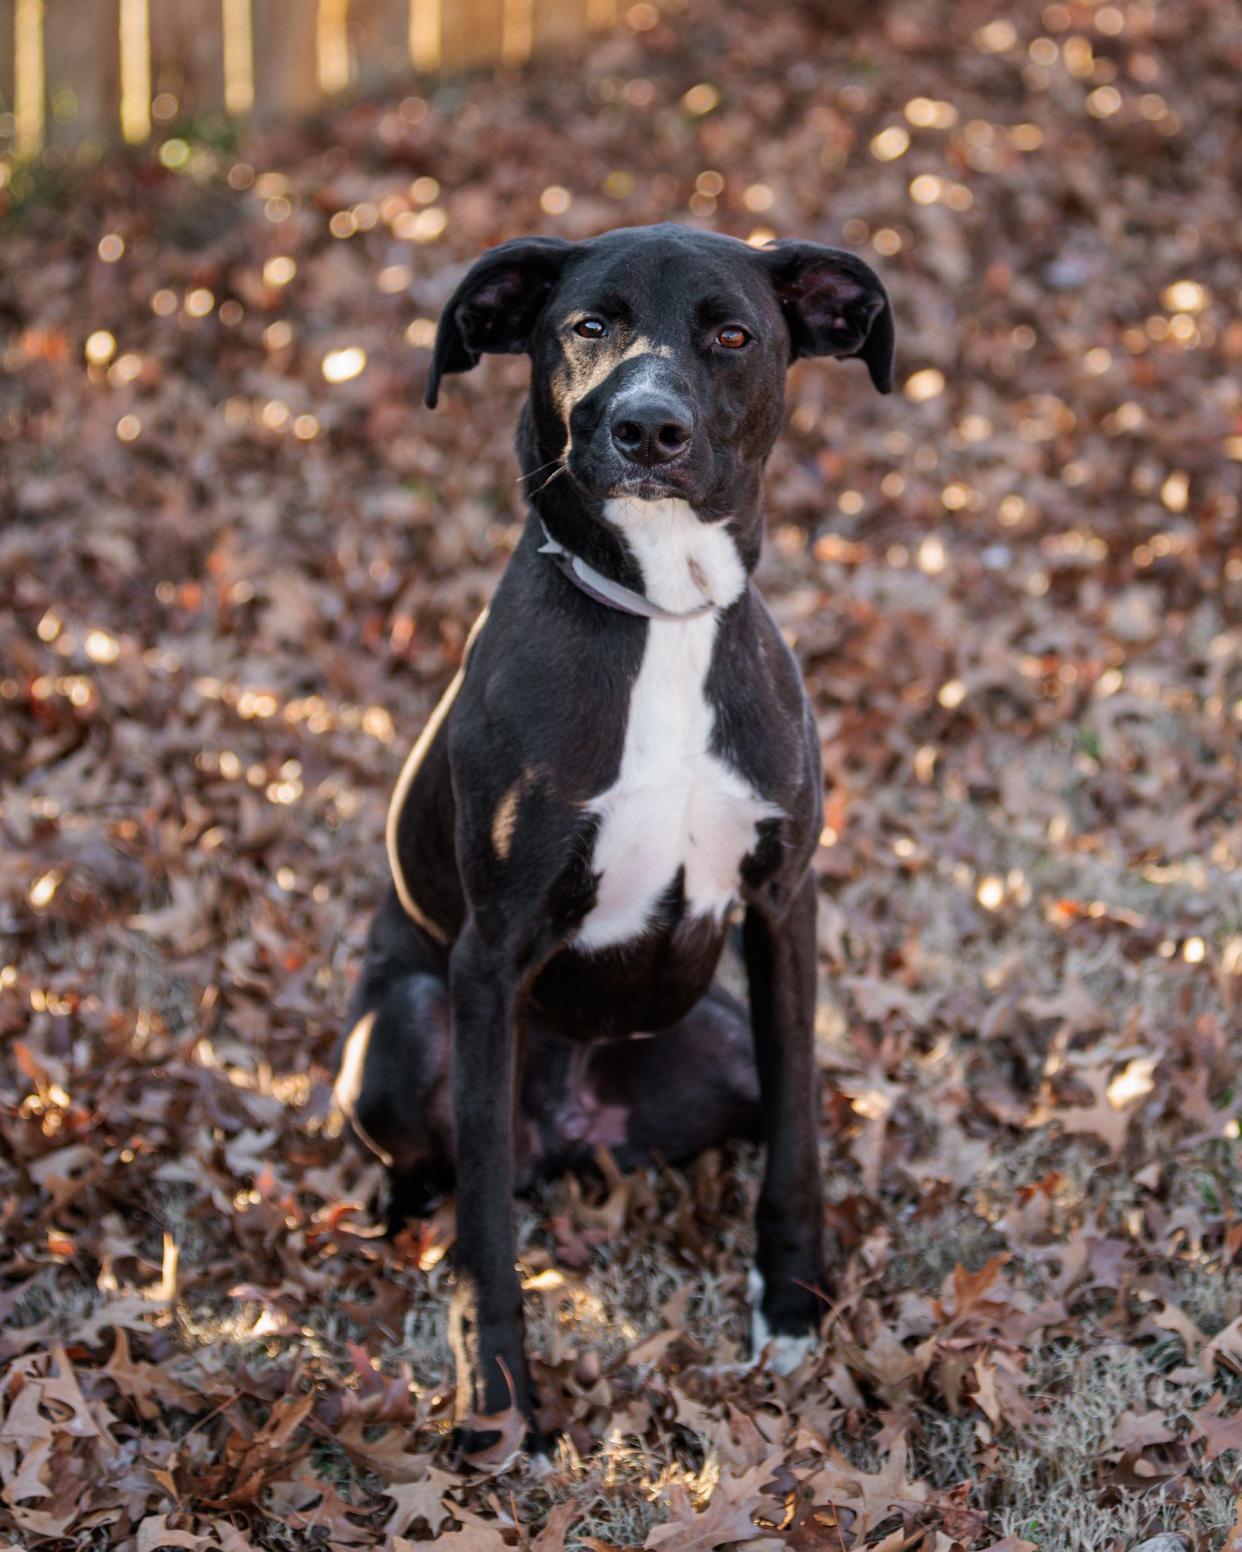 Hank, age 2, is a Hound Mix available for adoption at the Kentucky Humane Society